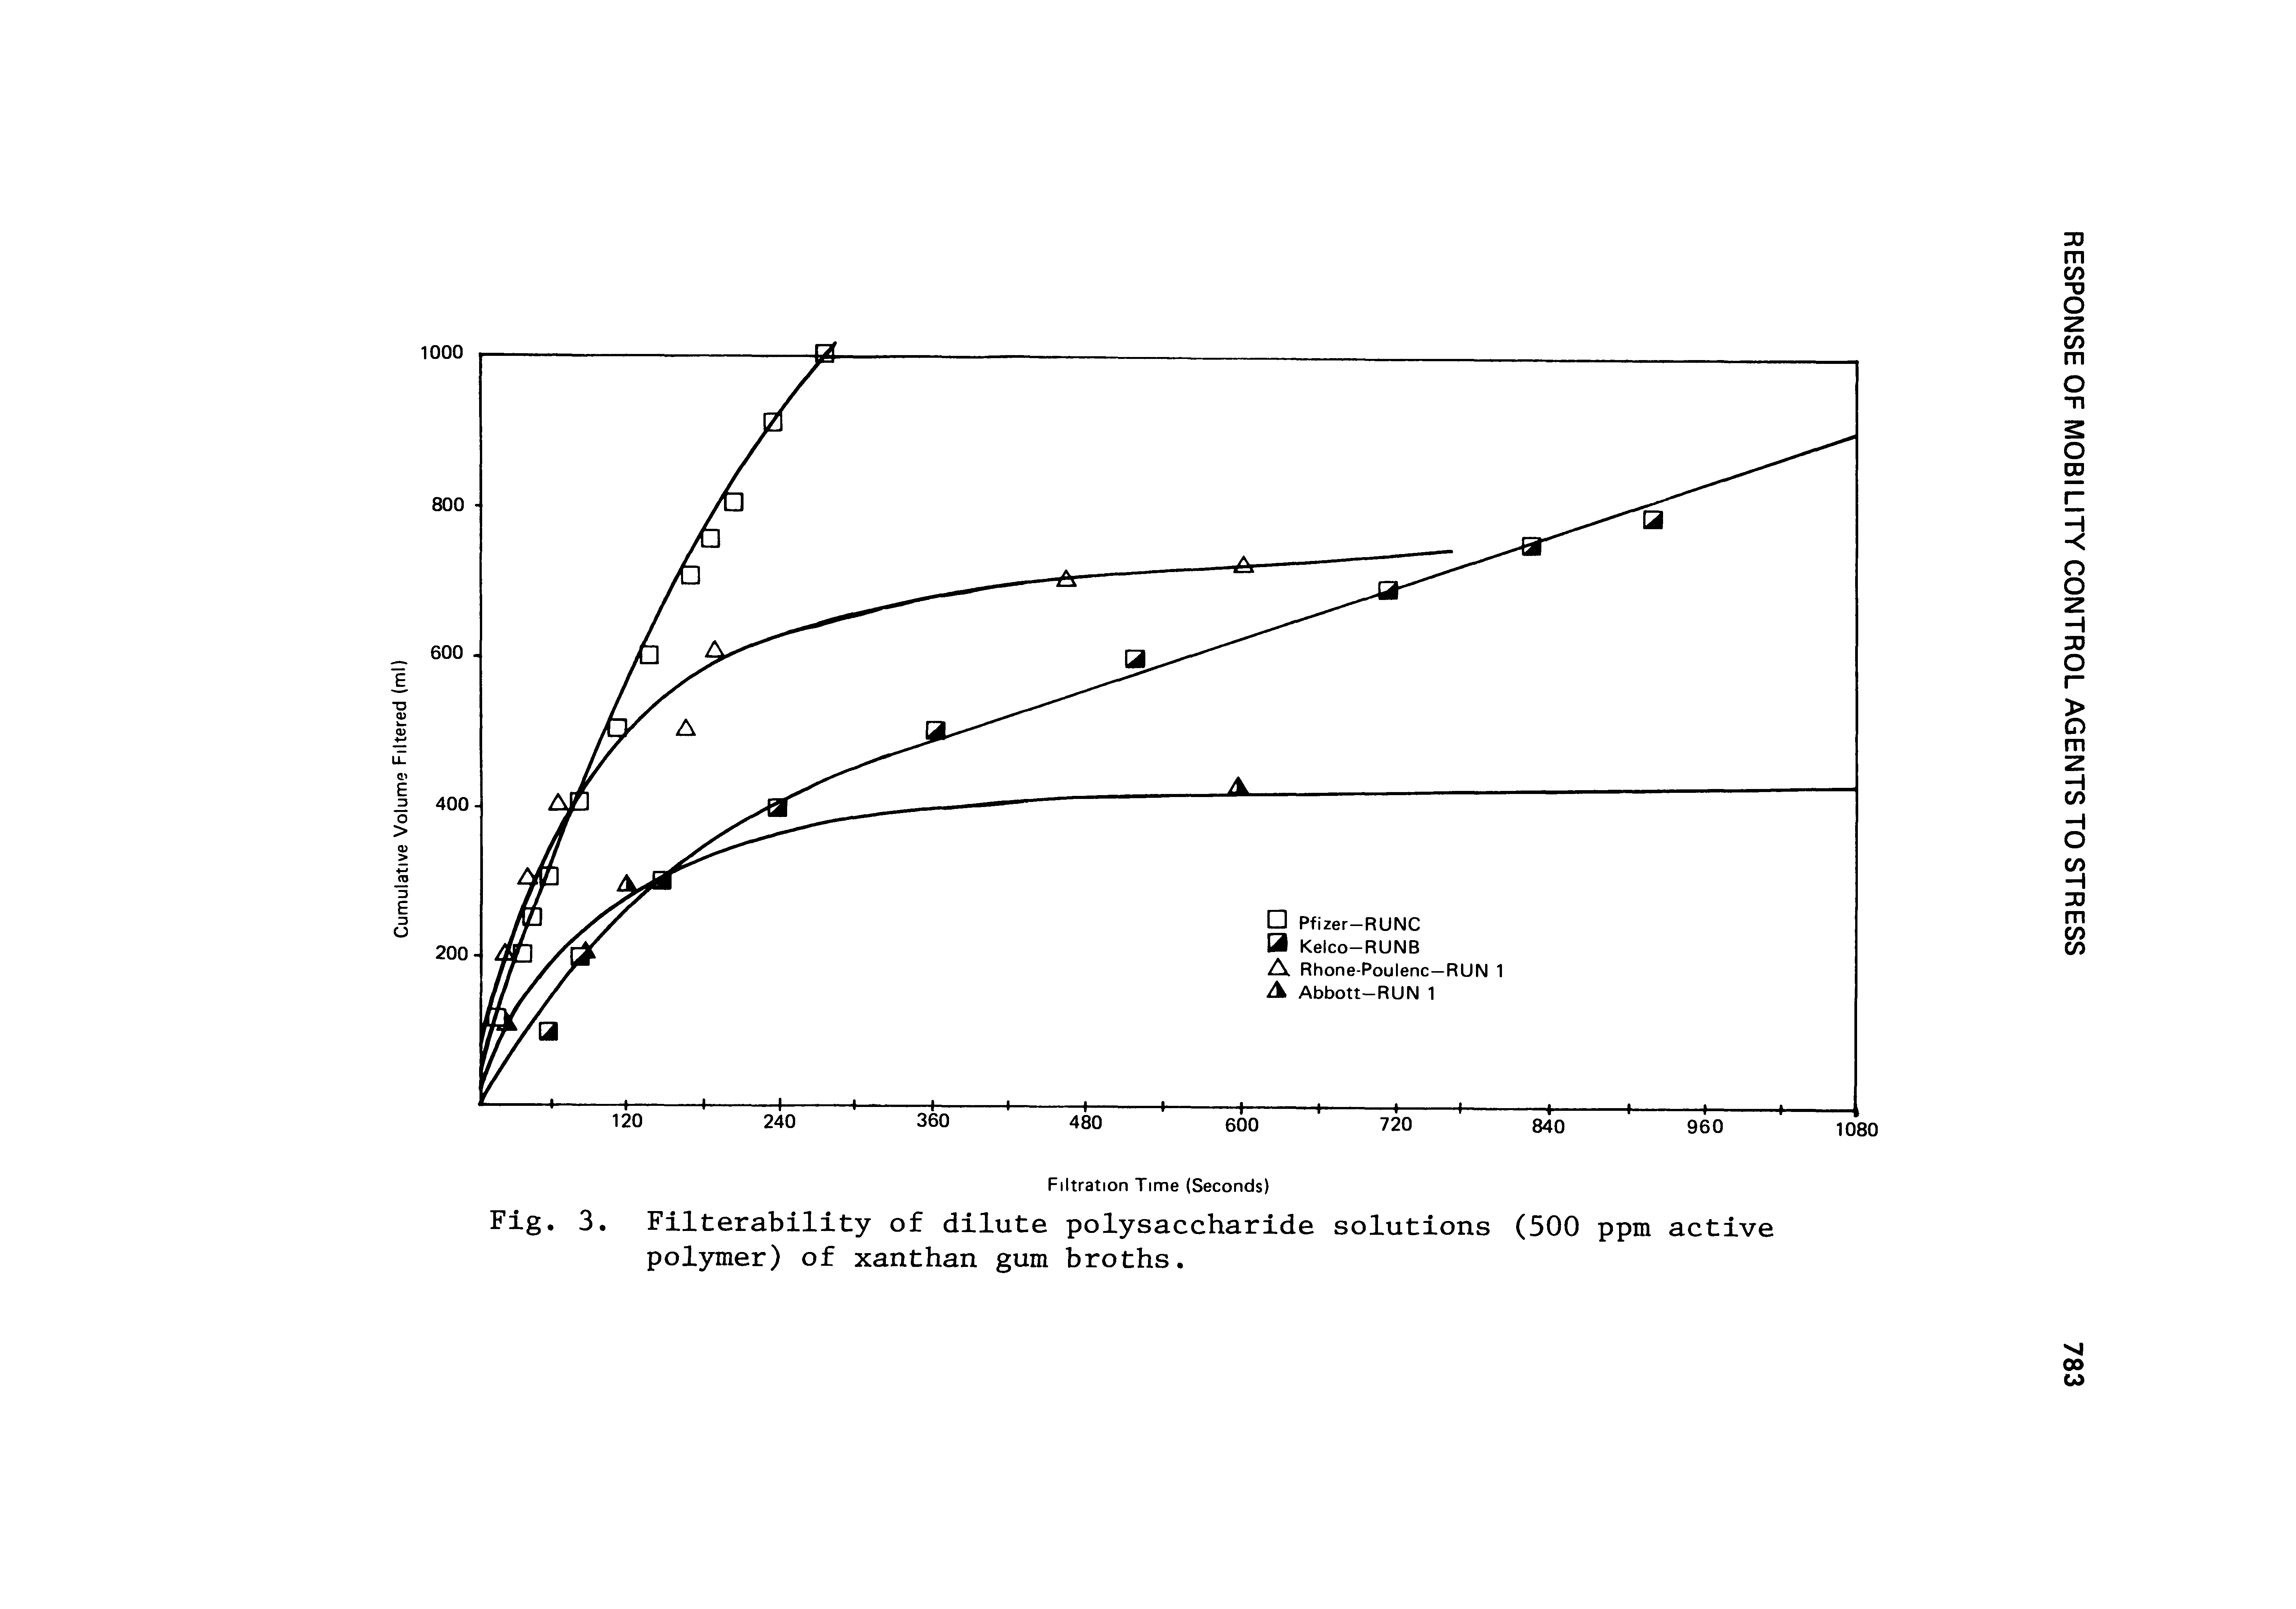 Fig. 3. Filterability of dilute polysaccharide solutions (500 ppm active polymer) of xanthan gum broths.